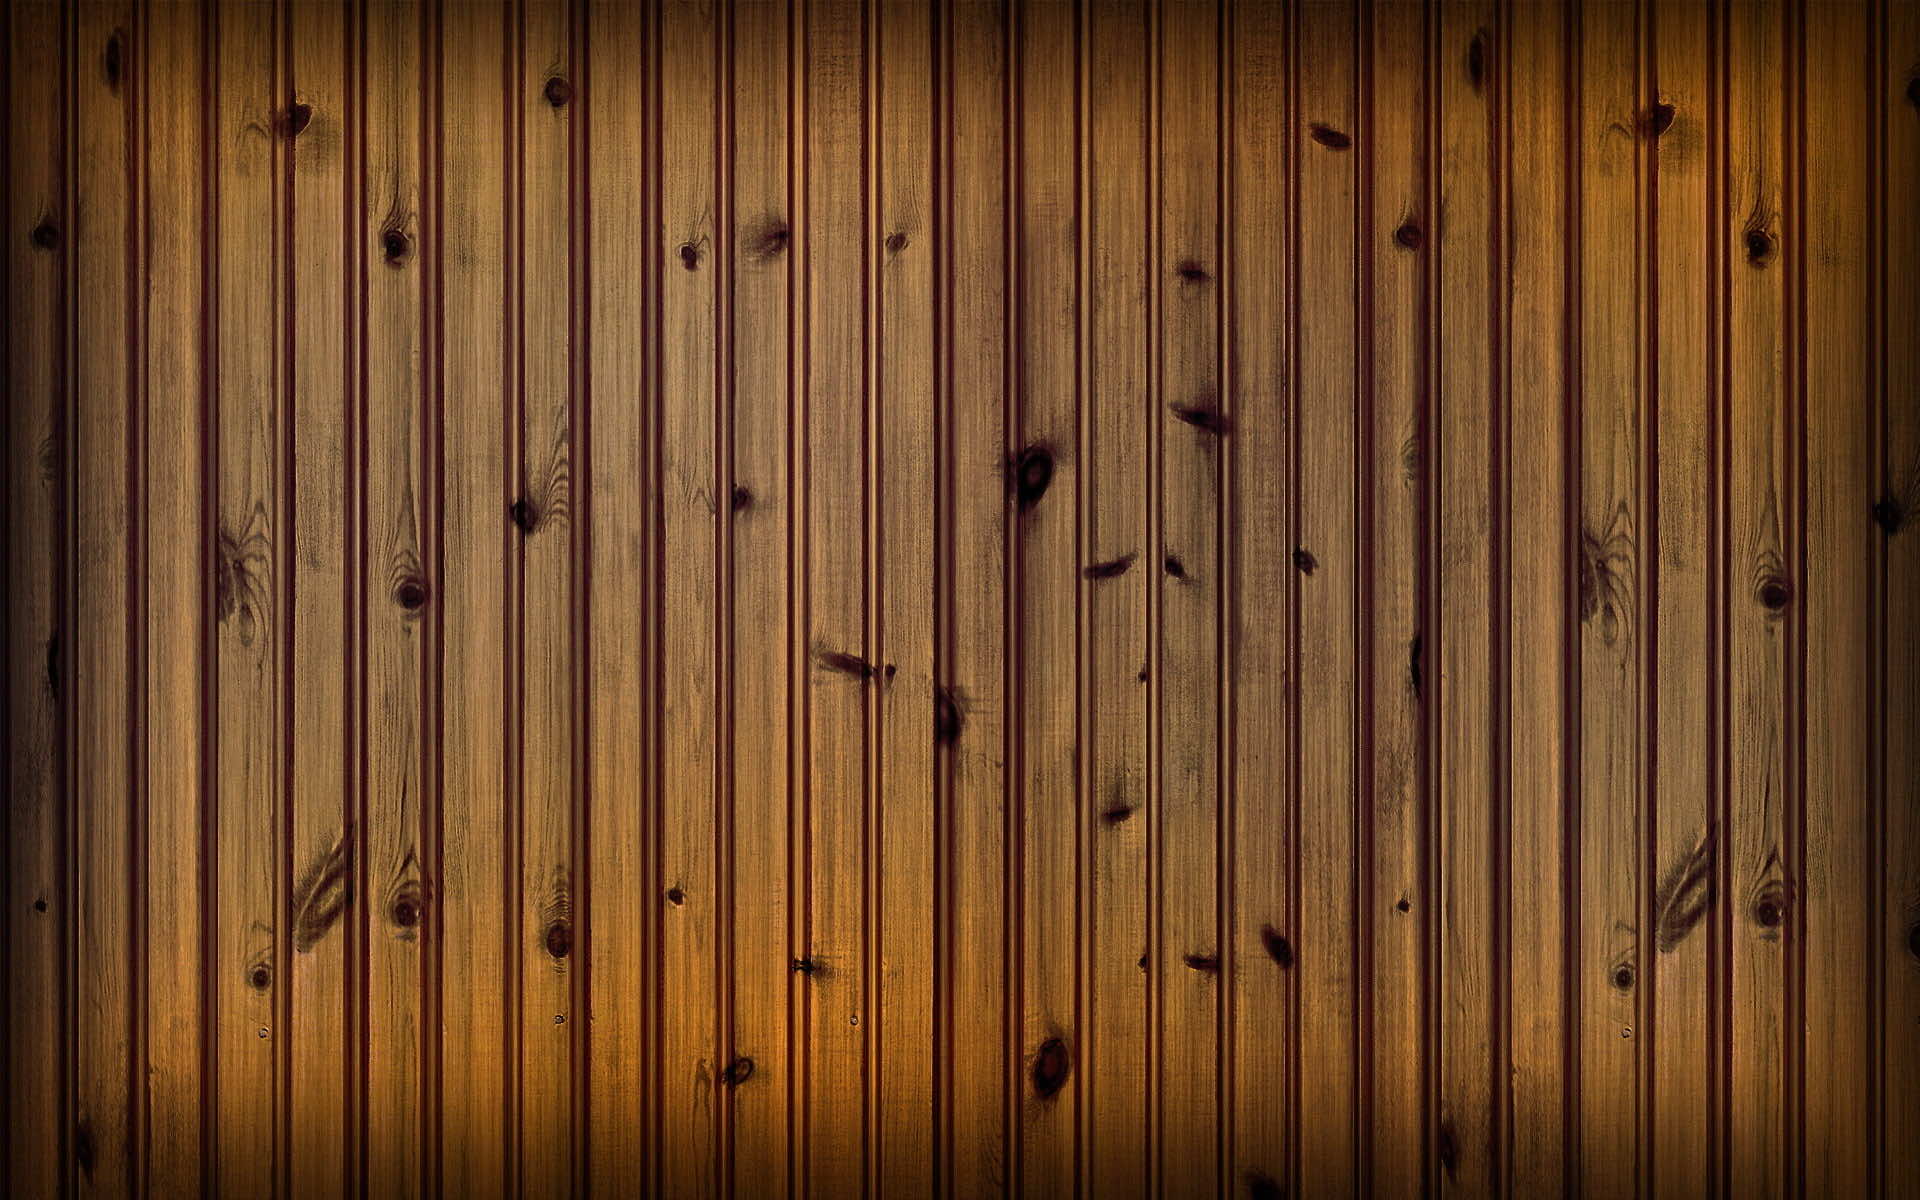 50 HD Wood Wallpapers For Free Download.